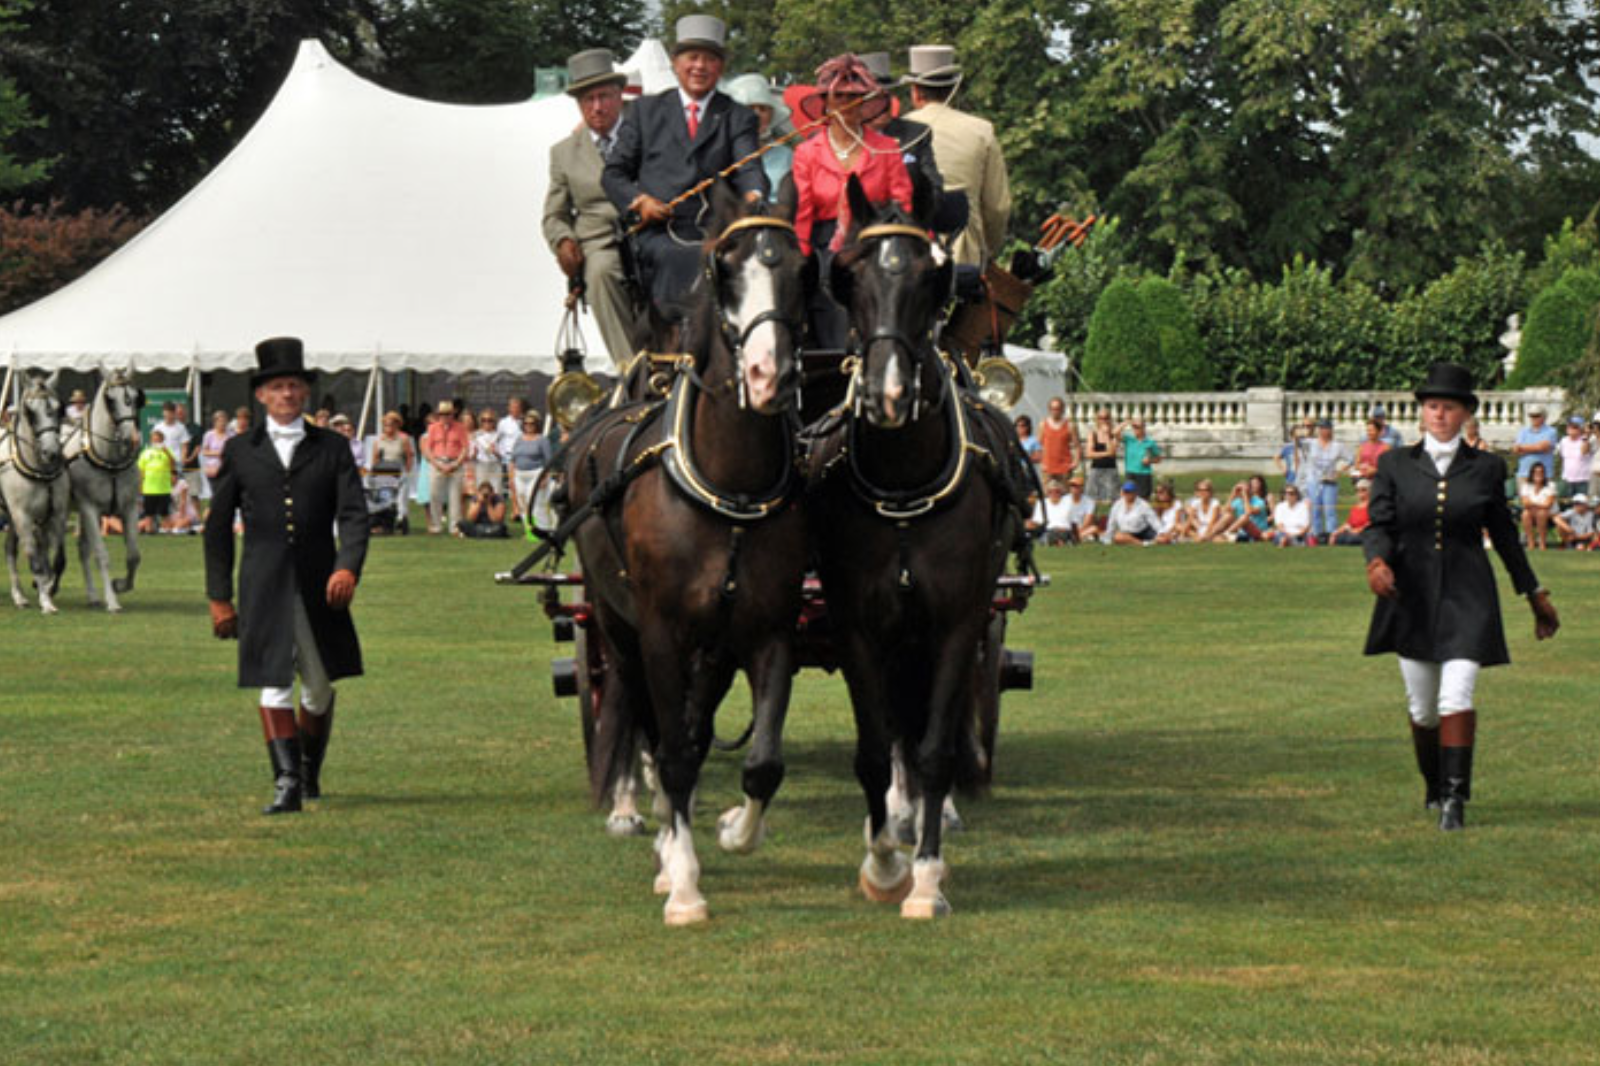 Newport, Rhode Island, as 19th century carriages, led by stately steeds, gallantly gather to herald Coaching Weekend in Newport.  From August 16th  to 19th, The Preservation Society of Newport County hosts members of the Carriage Association of American 